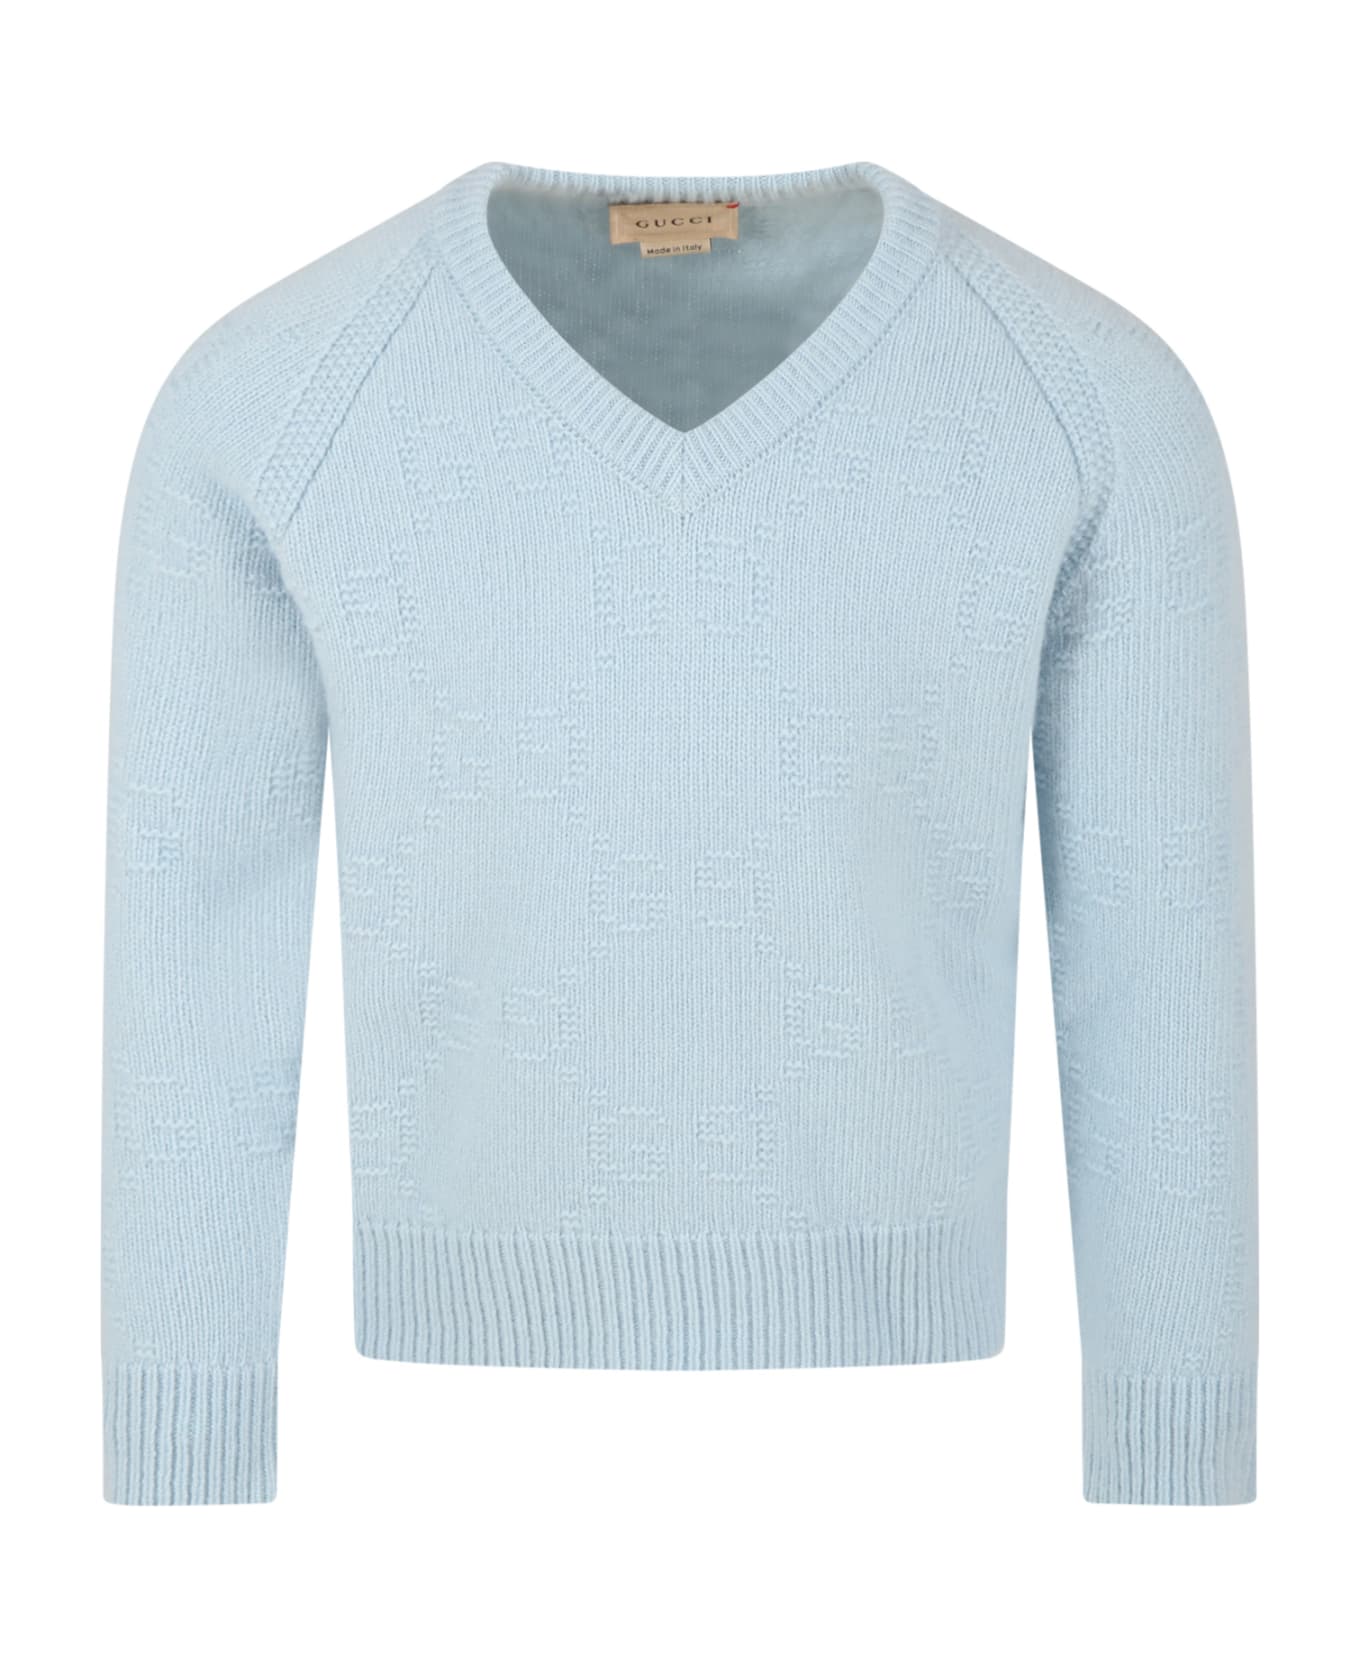 Gucci Light Blue Sweater For Kids With Double Gg - Light Blue